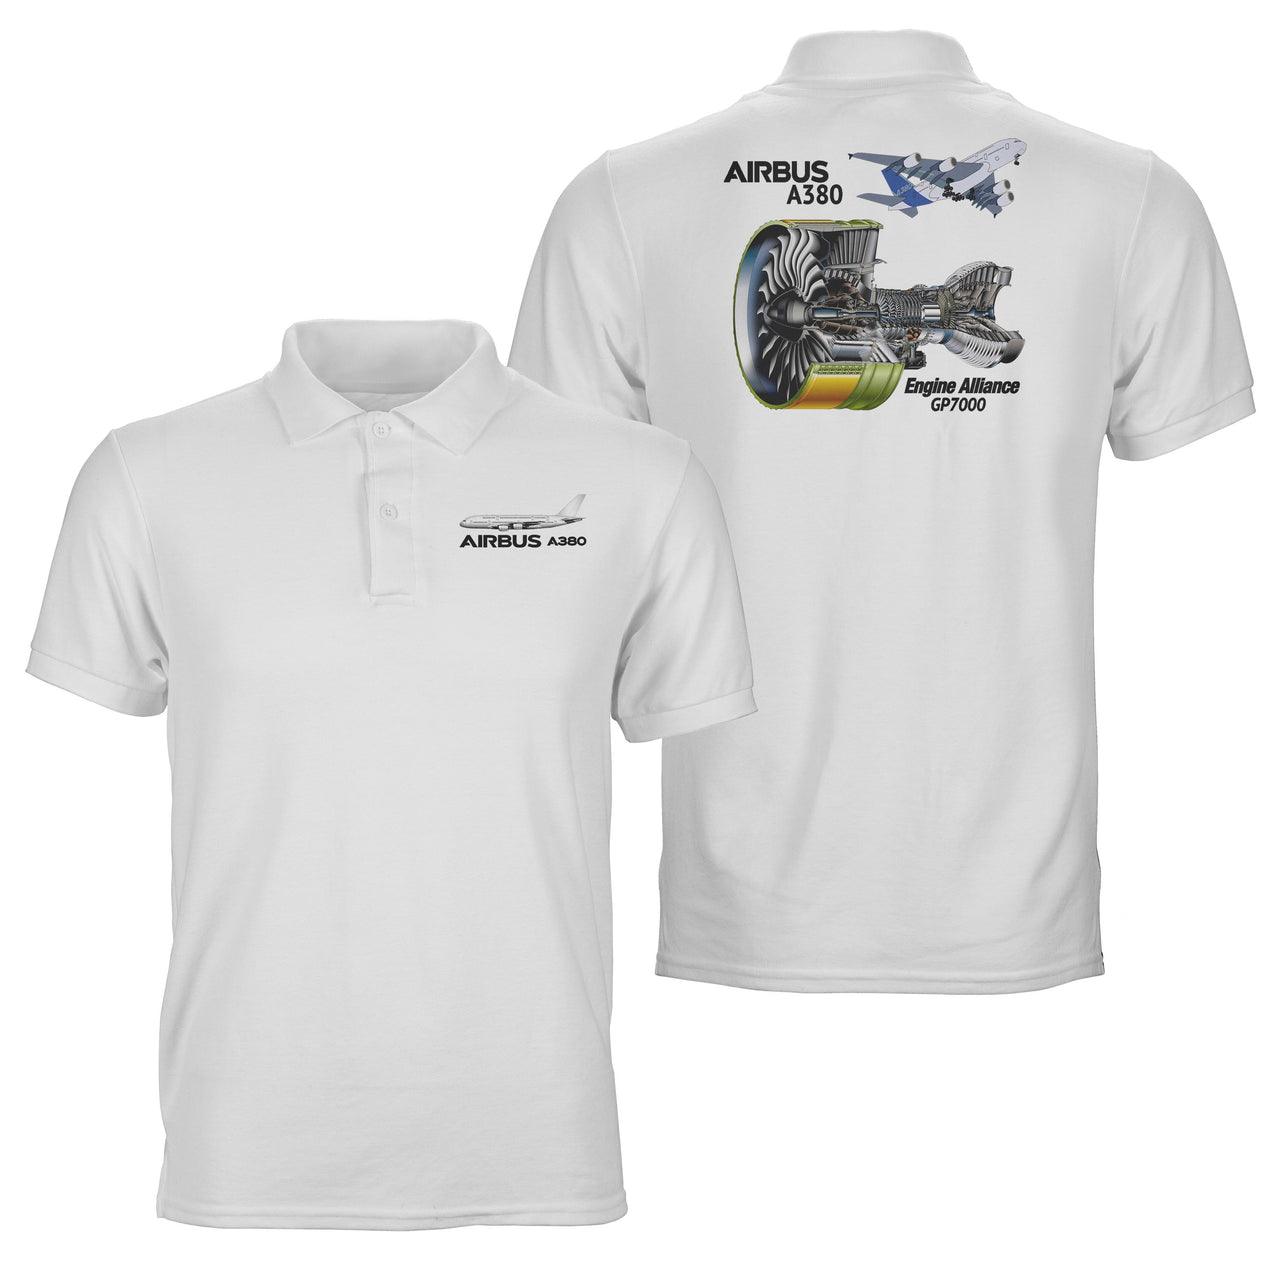 Airbus A380 & GP7000 Engine Designed Double Side Polo T-Shirts